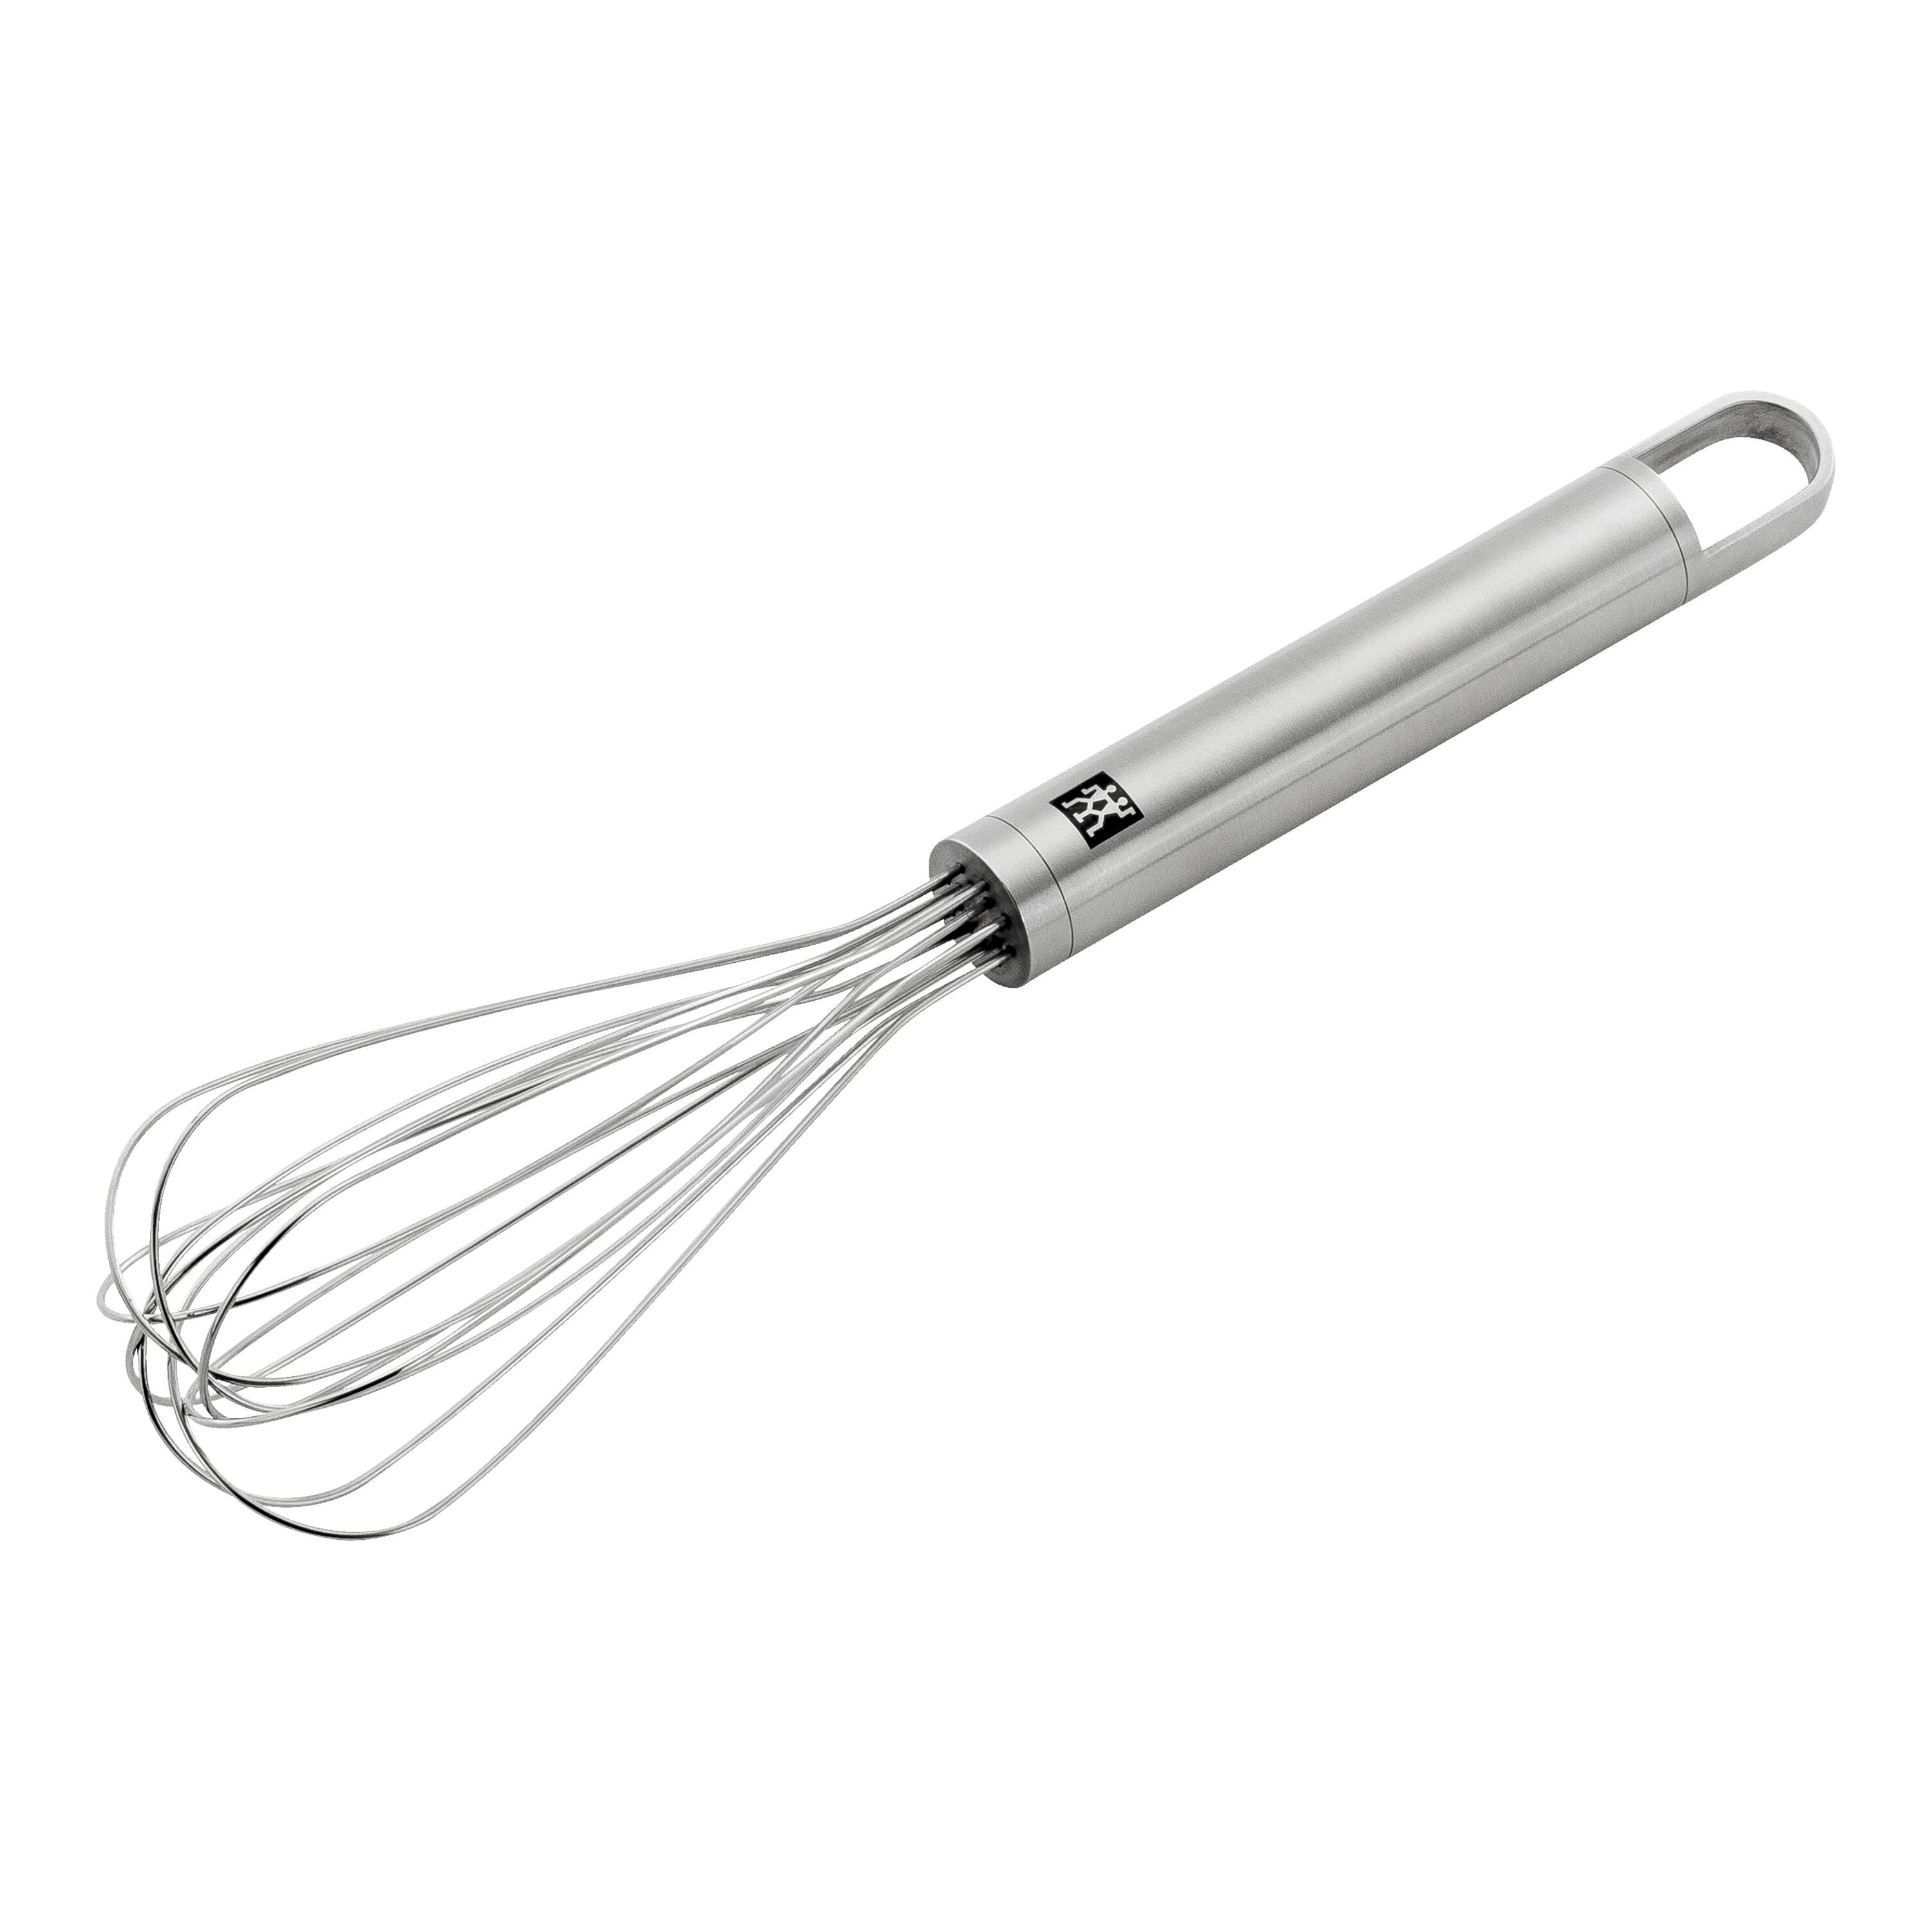 This kitchen whisk cleaner makes baking cleanup a breeze